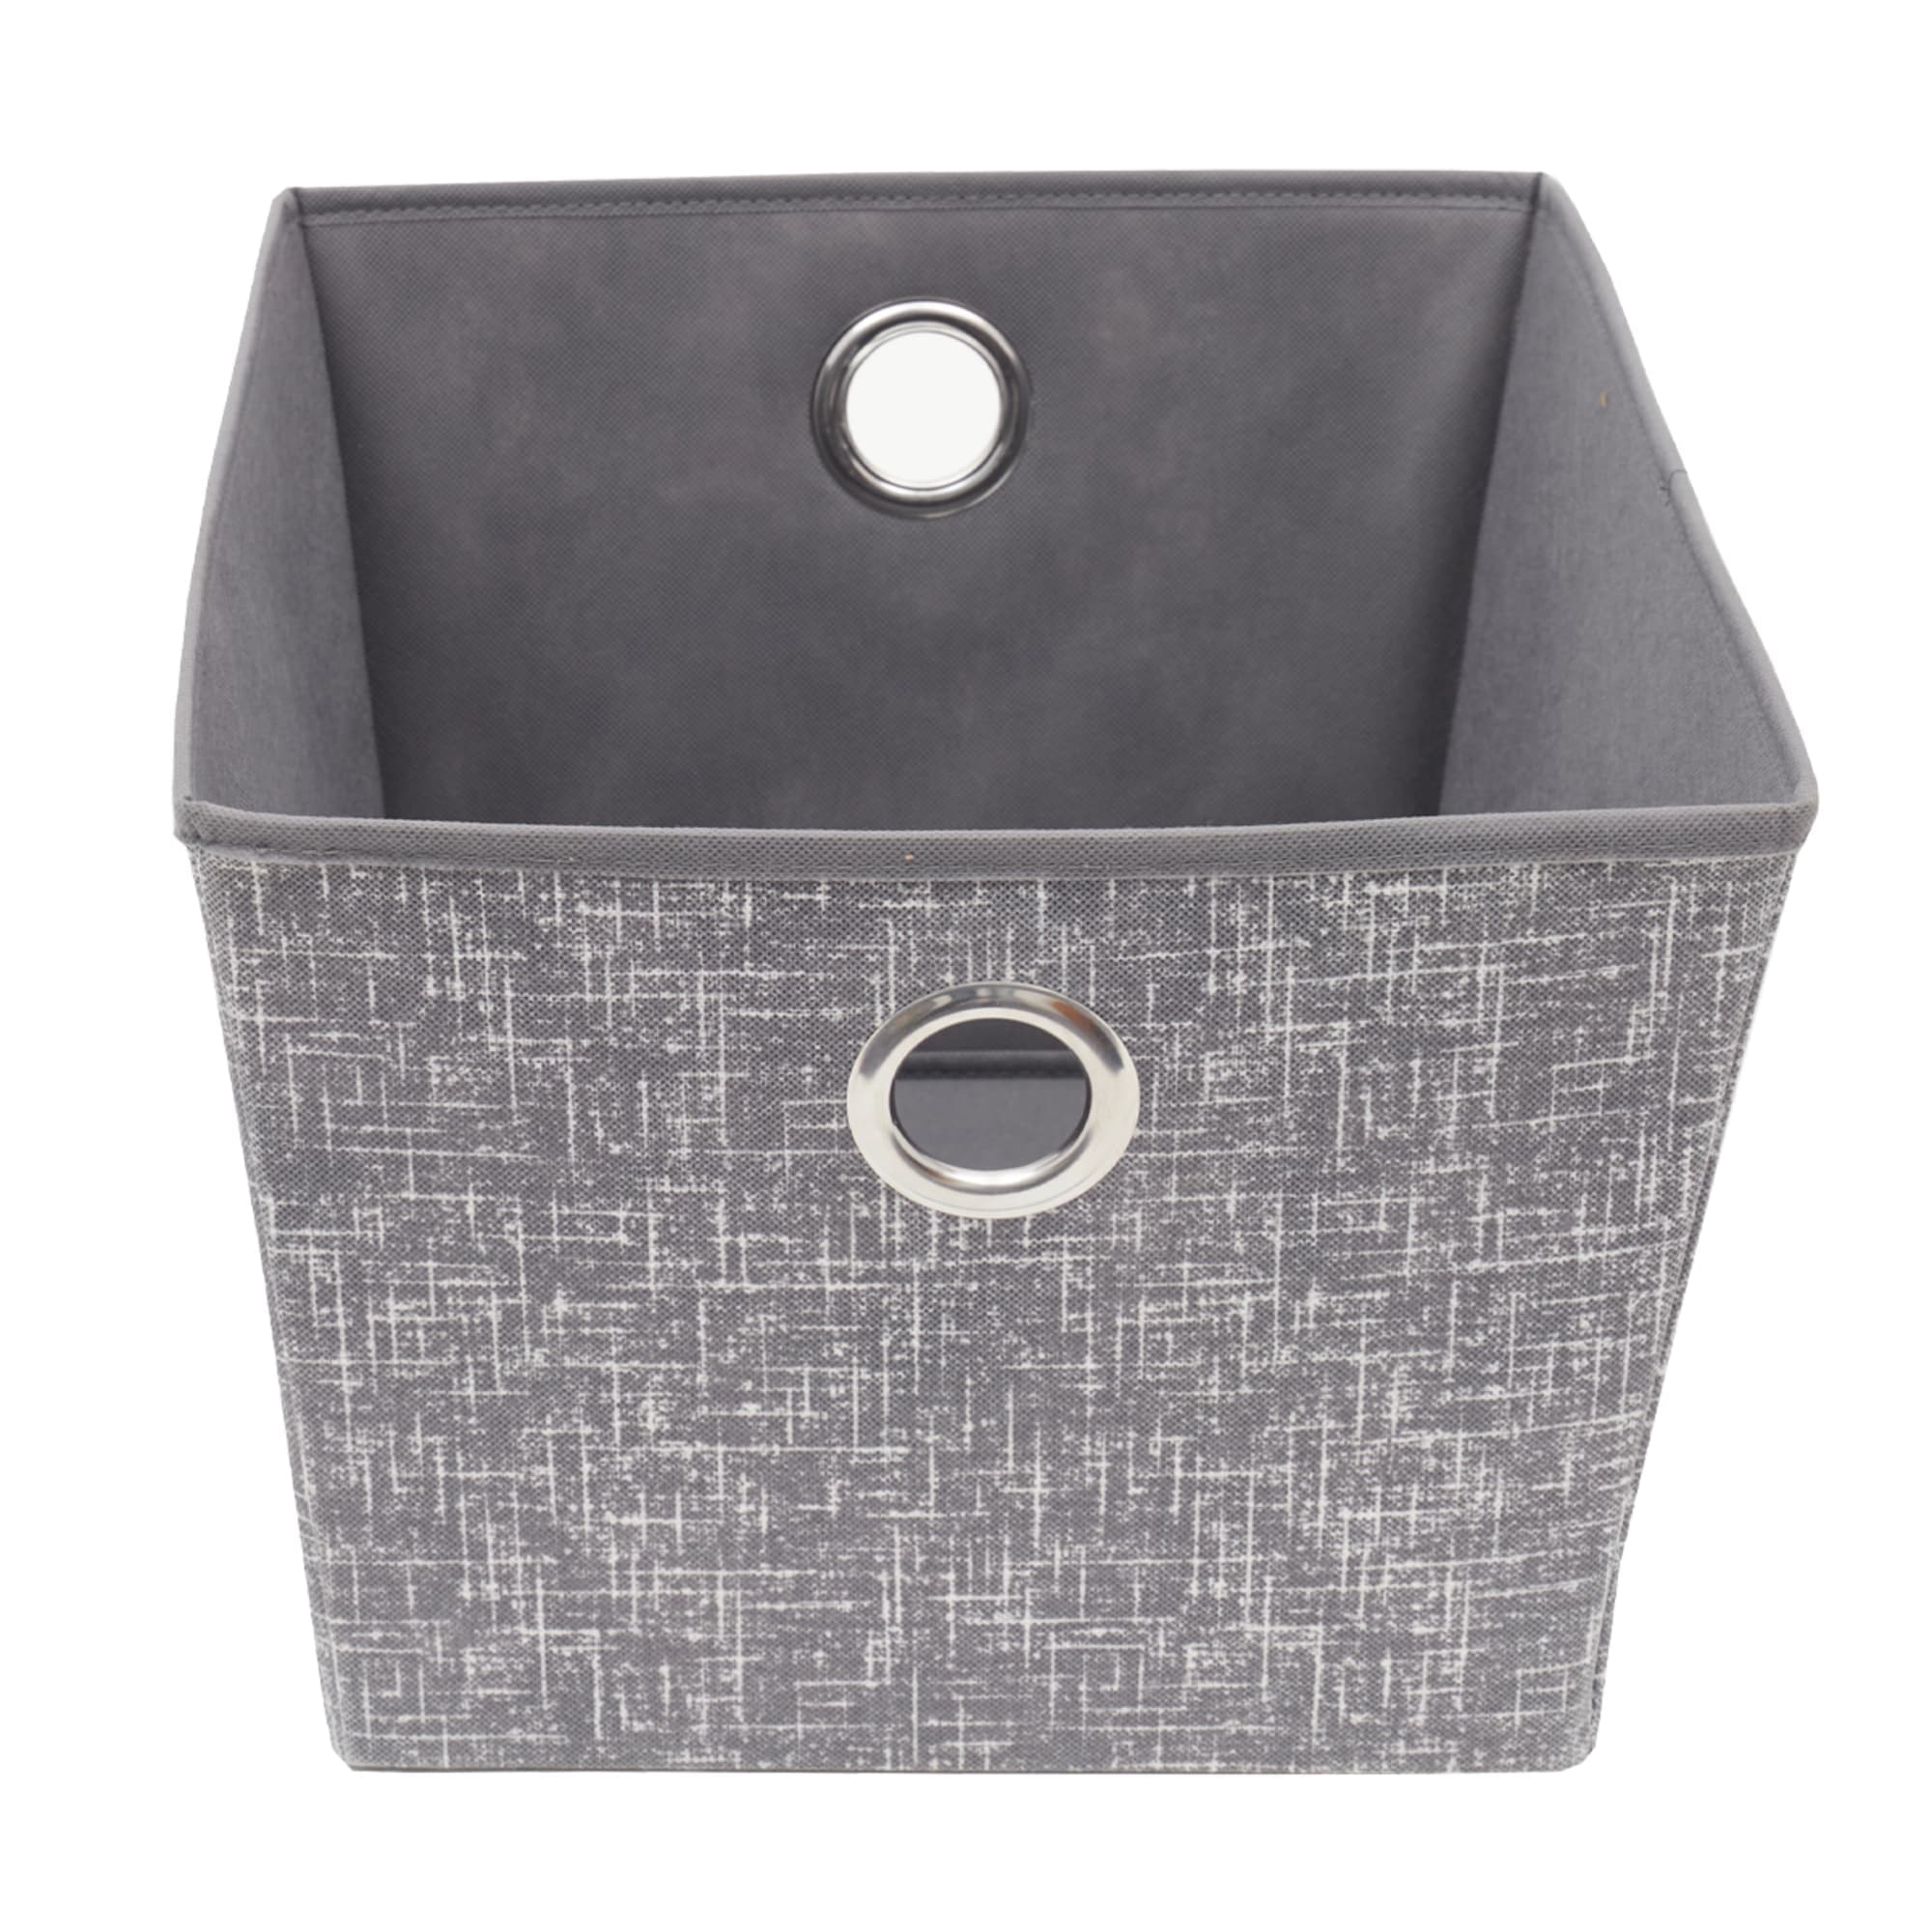 Home Basics Graph Line Large Open Cube Storage Bin, Grey $6.00 EACH, CASE PACK OF 12